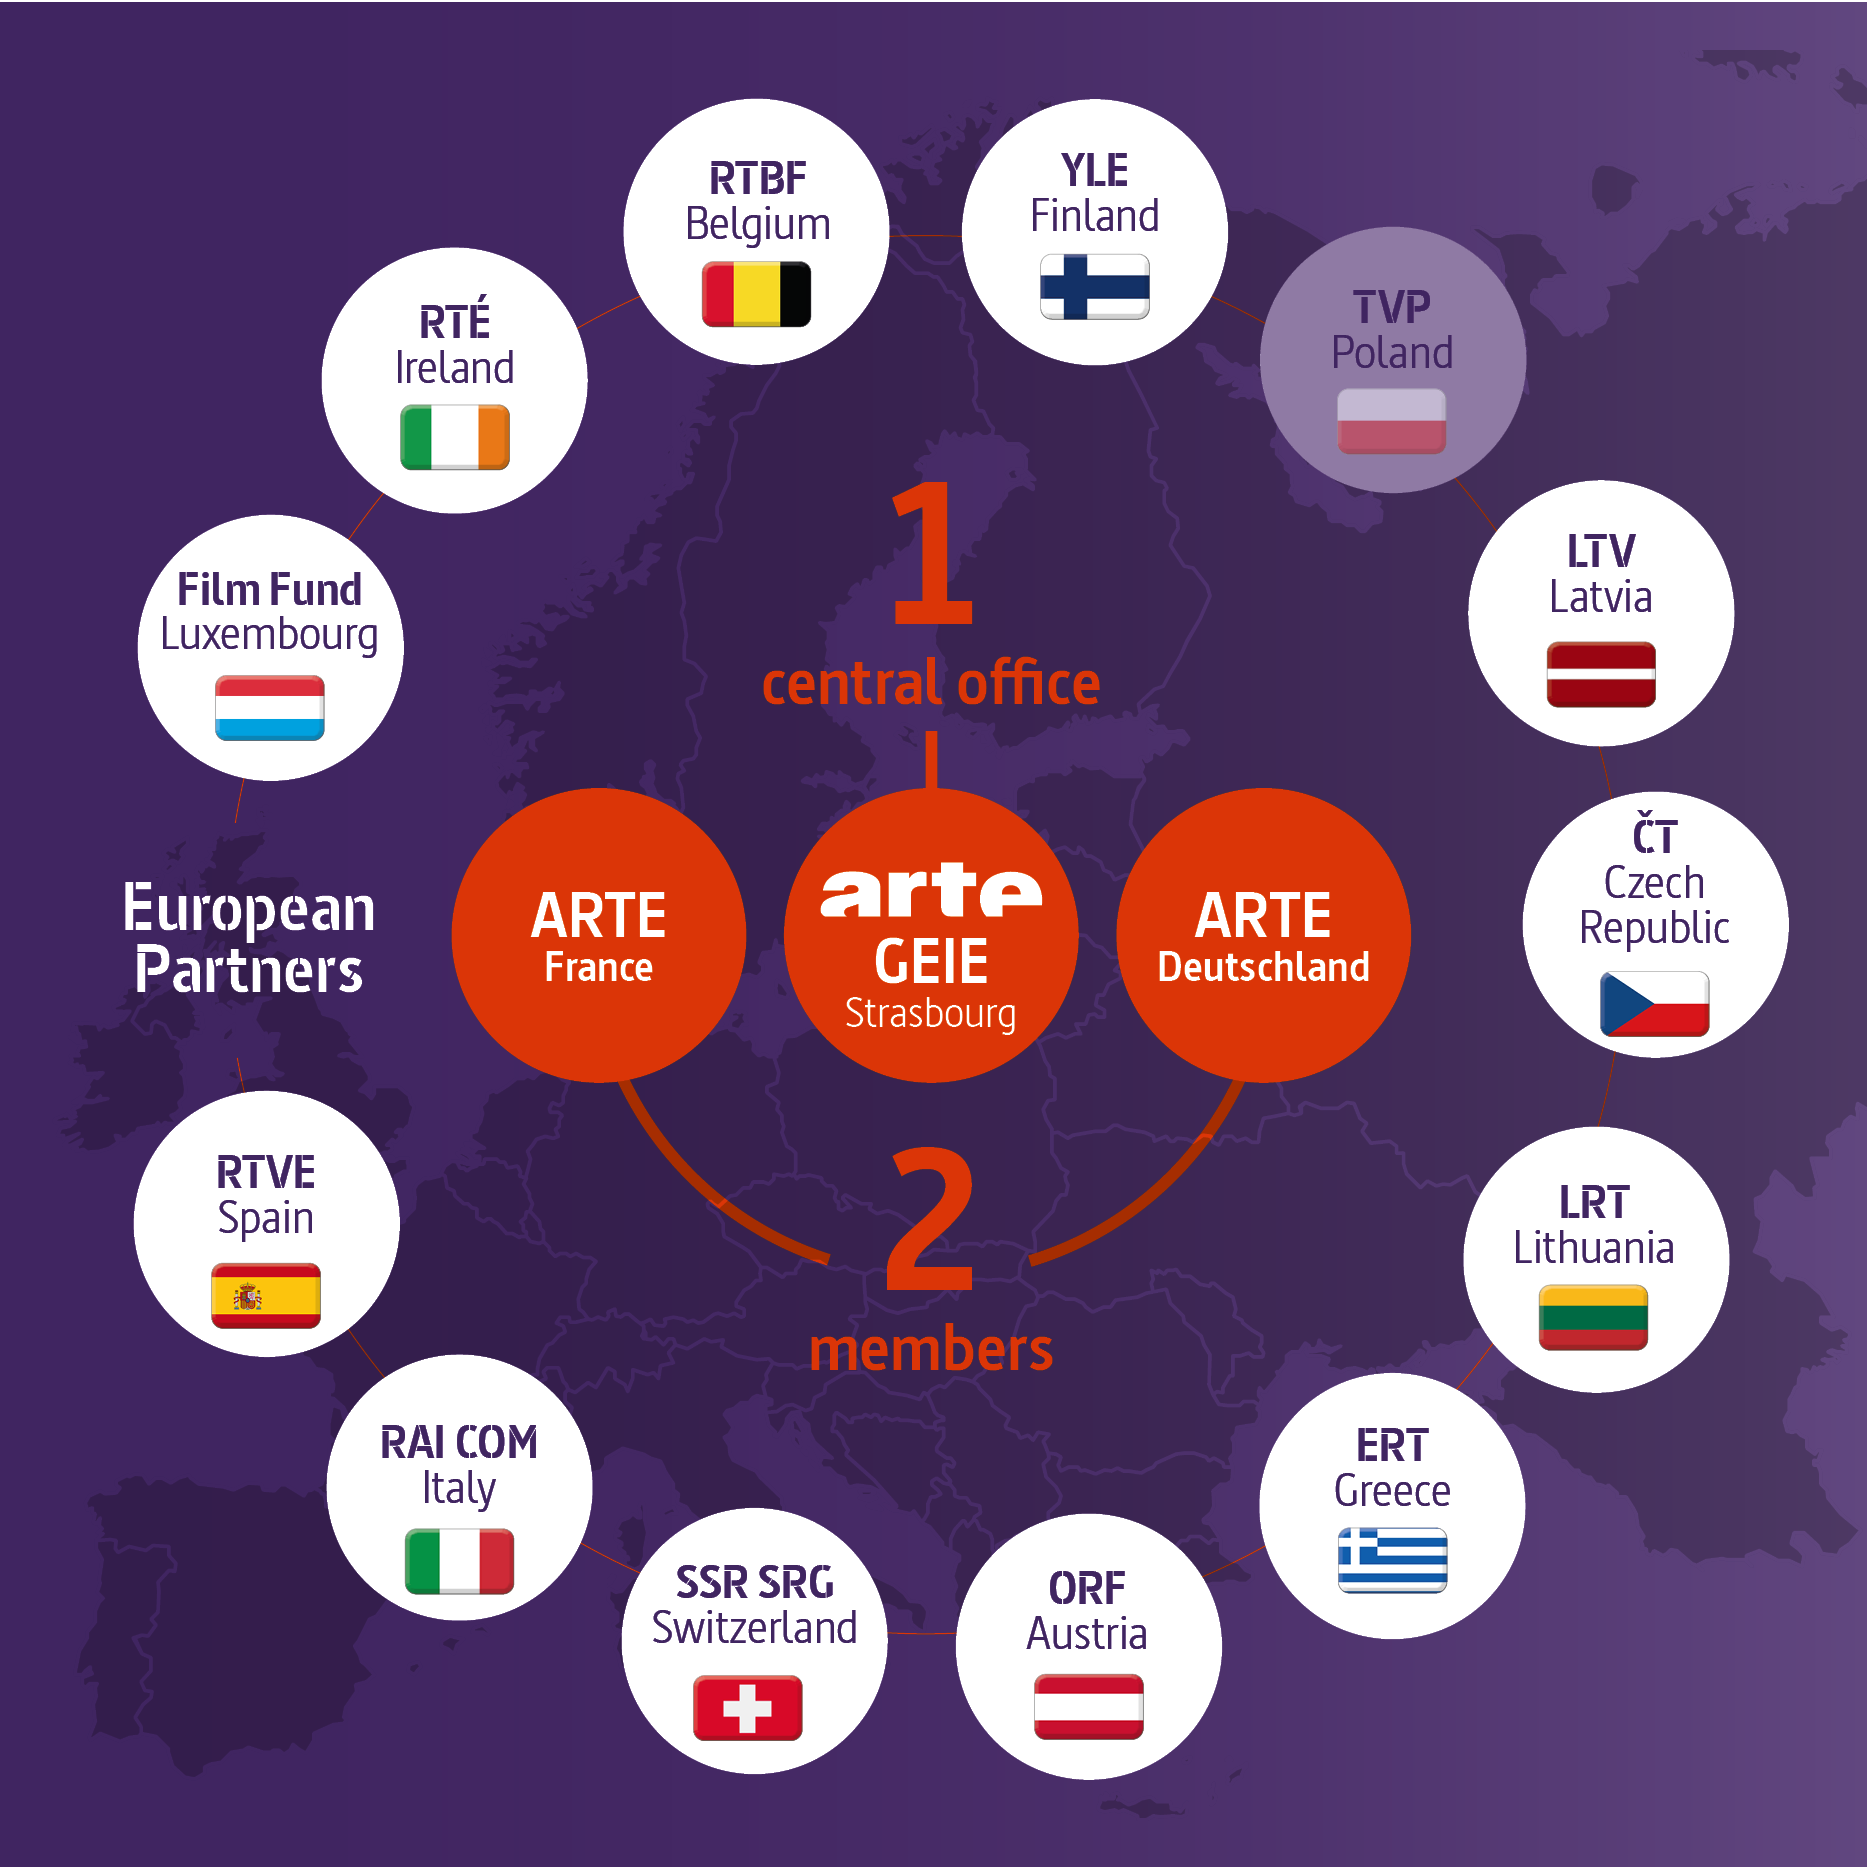 One central office: ARTE GEIE in Strasbourg.
Two members: ARTE France and ARTE Deutschland.
The partners in Europe: Film Fund Luxembourg, RTÉ in Ireland, RTBF in Belgium, YLE in Finland, (TVP in Poland), LTV in Latvia, ČT in Czechia, LRT in Lithuania, ERT in Greece, ORF in Austria, SSR SRG in Switzerland, RAI Com in Italy and RTVE in Spain.